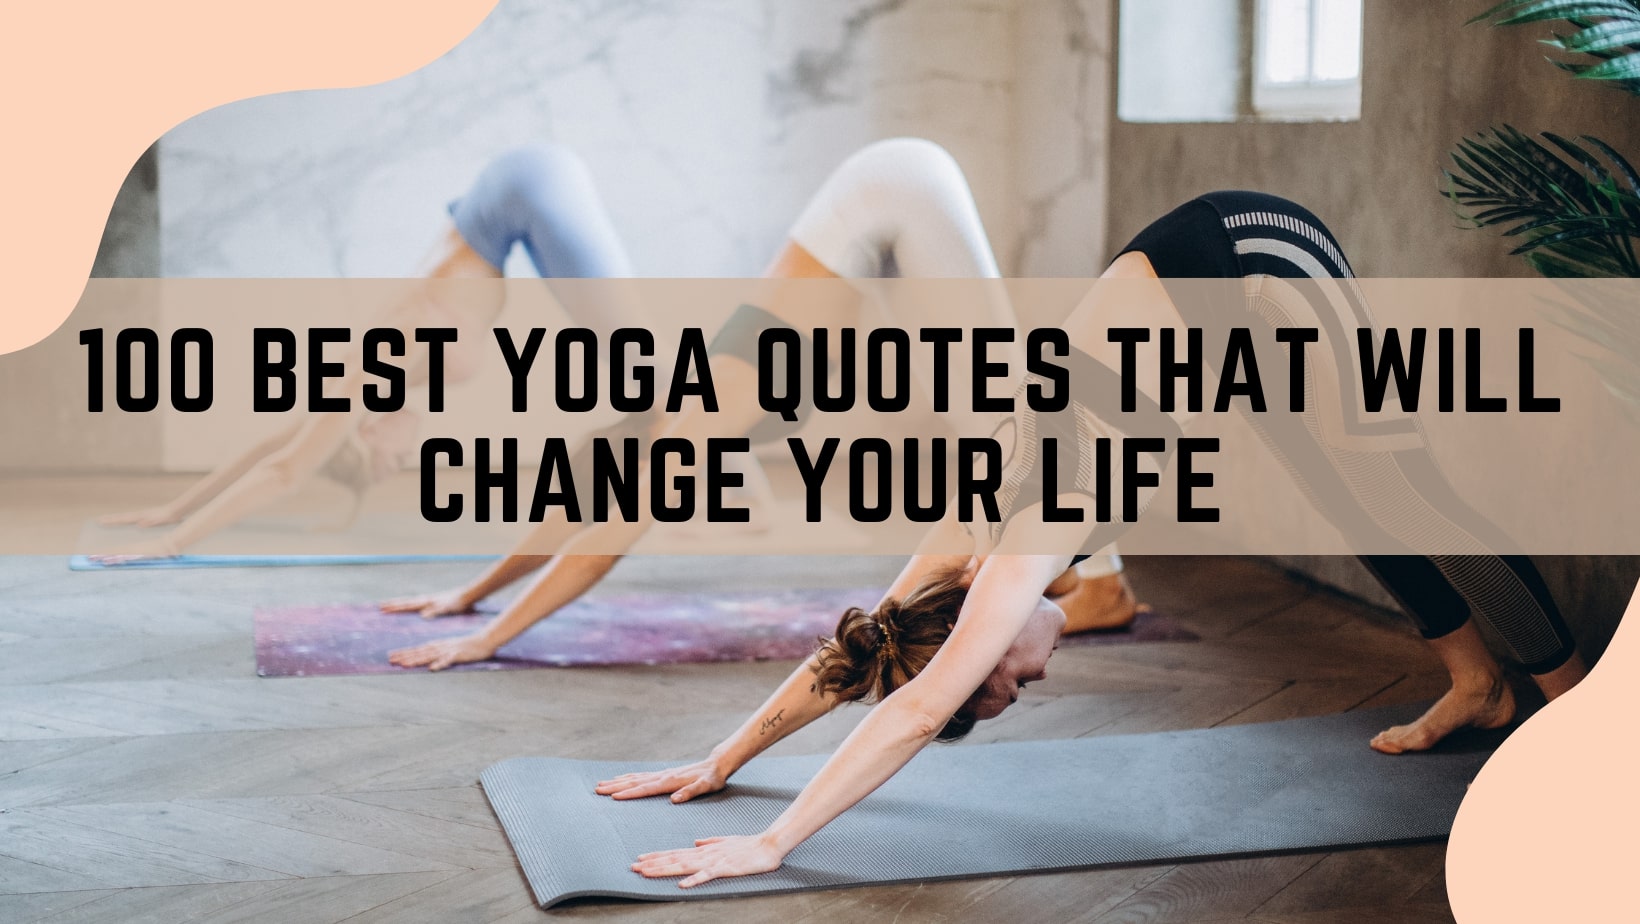 Yoga quote feature image